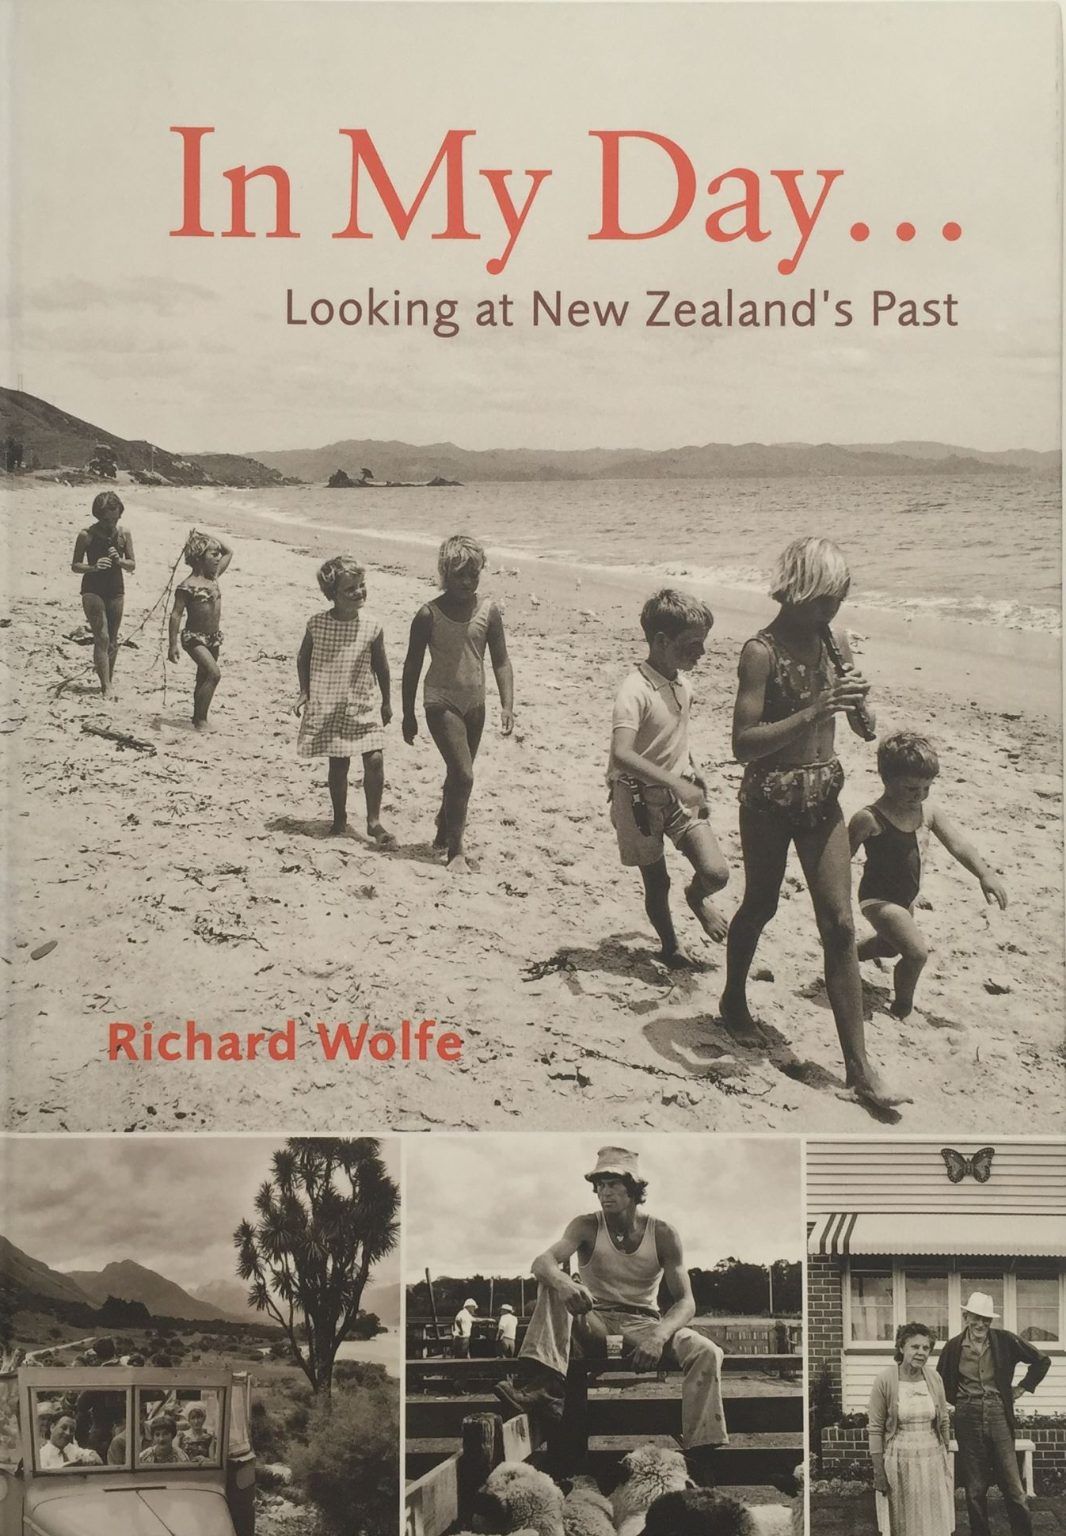 IN MY DAY: Looking at New Zealand's Past